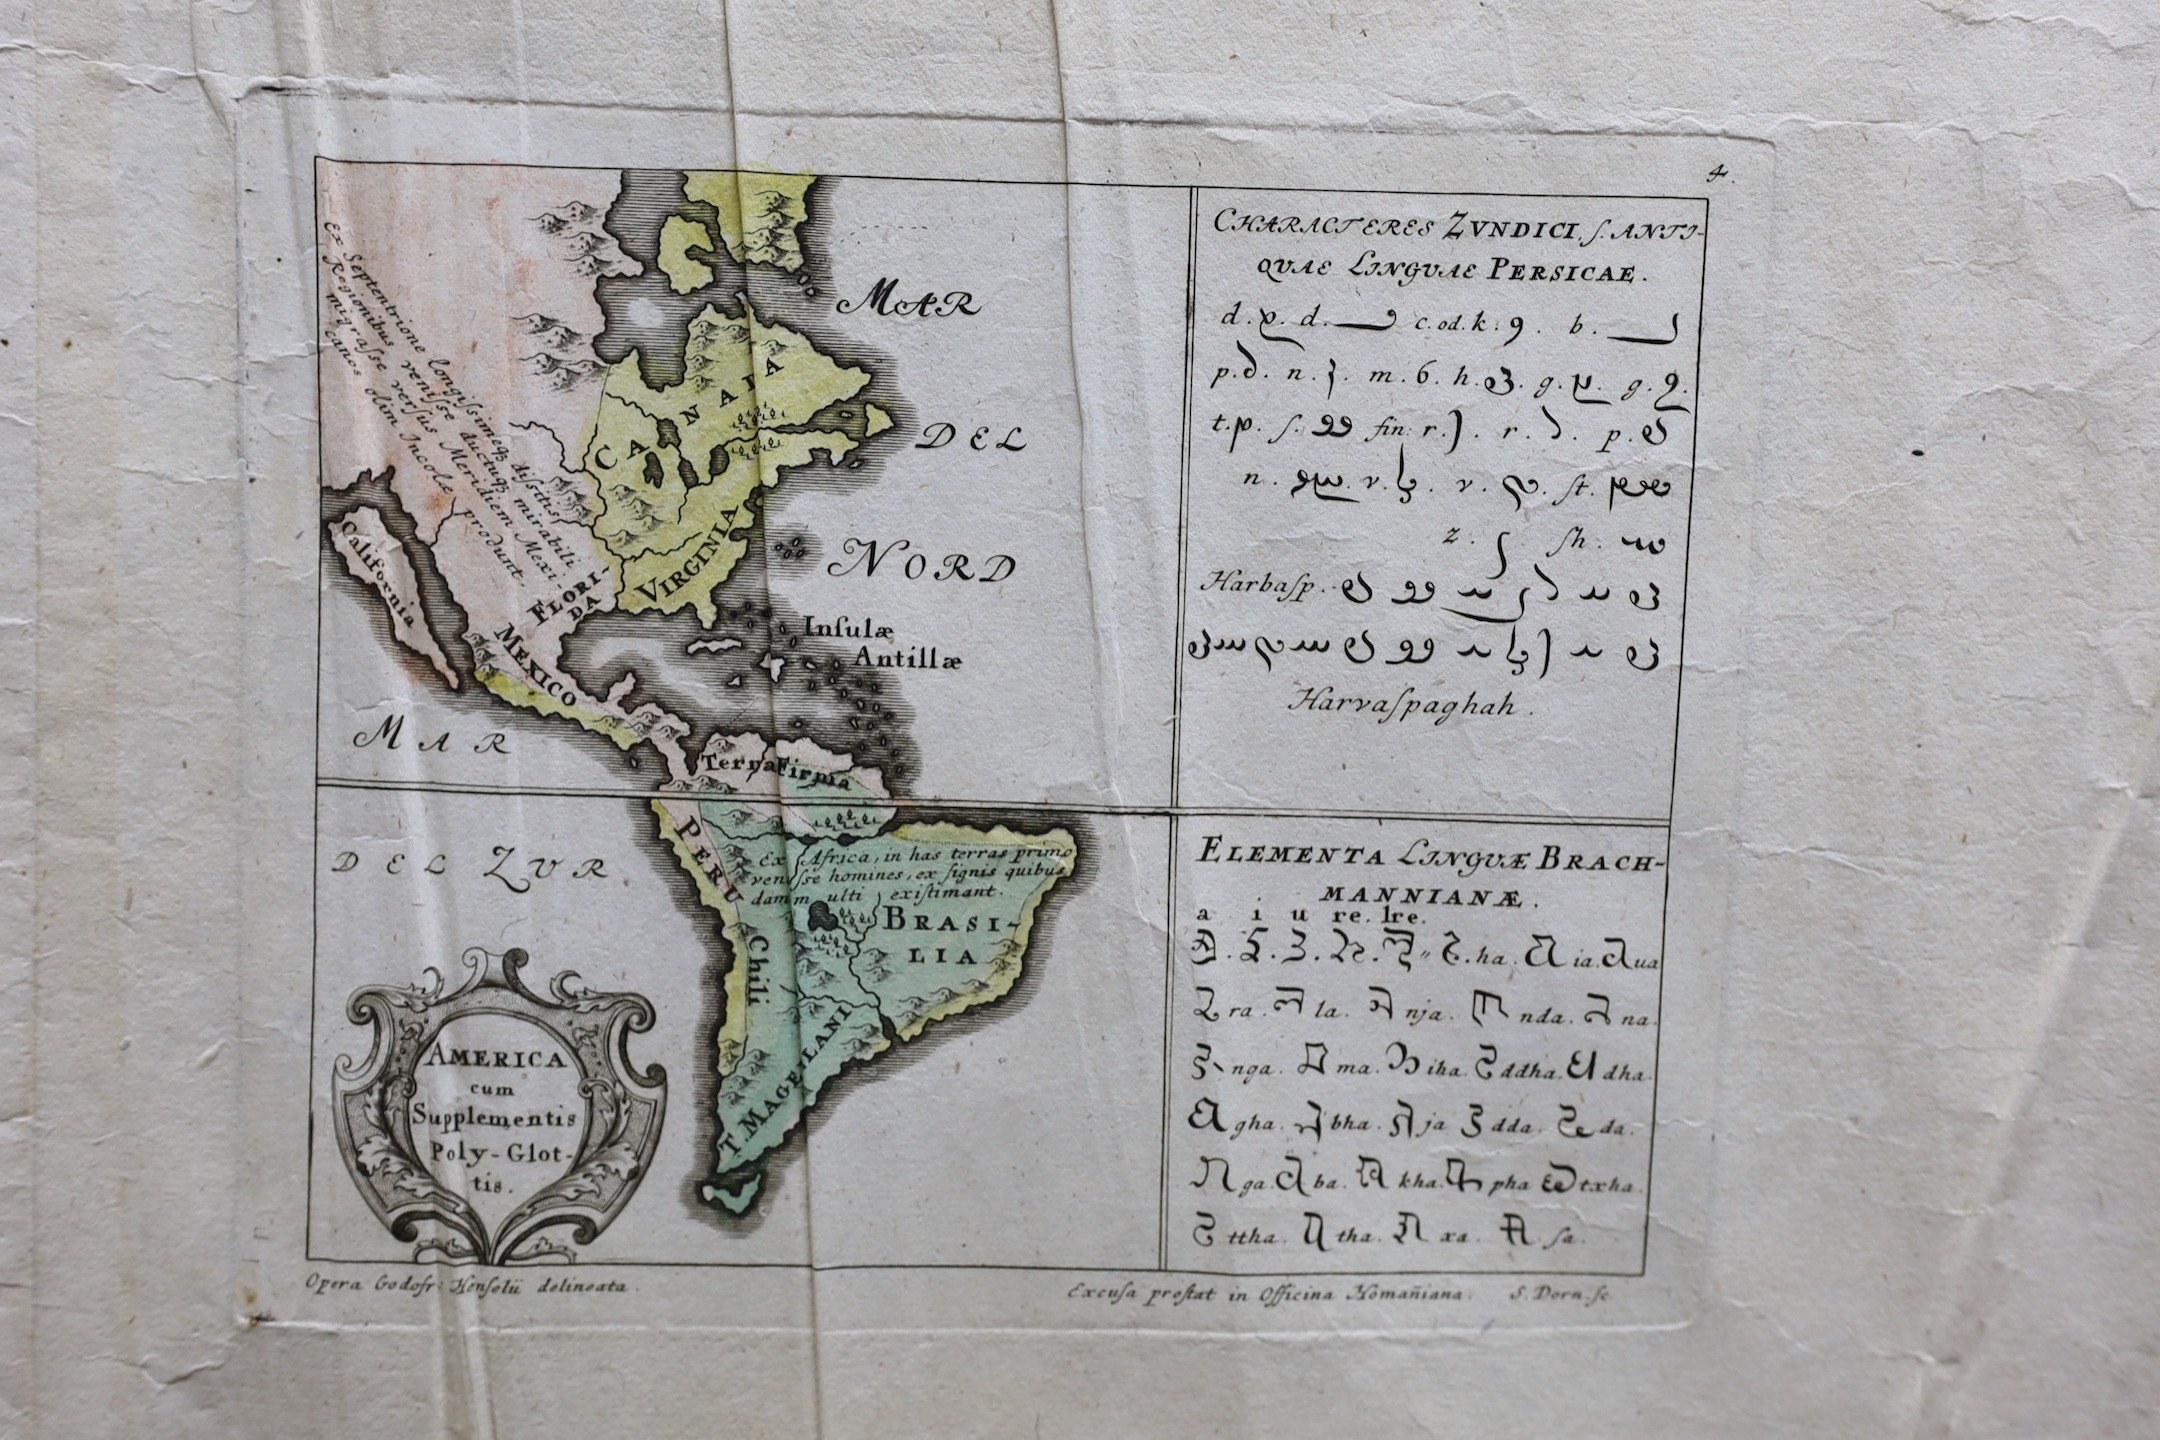 Godofredo Henselio [i.e., Gottfried Hensel], Scholae A. C. ap. Hirschb, four mappae geographico-polyglottae, in various languages and scripts, Nuremburg: Homann Heirs, 1741. and another map of Europe